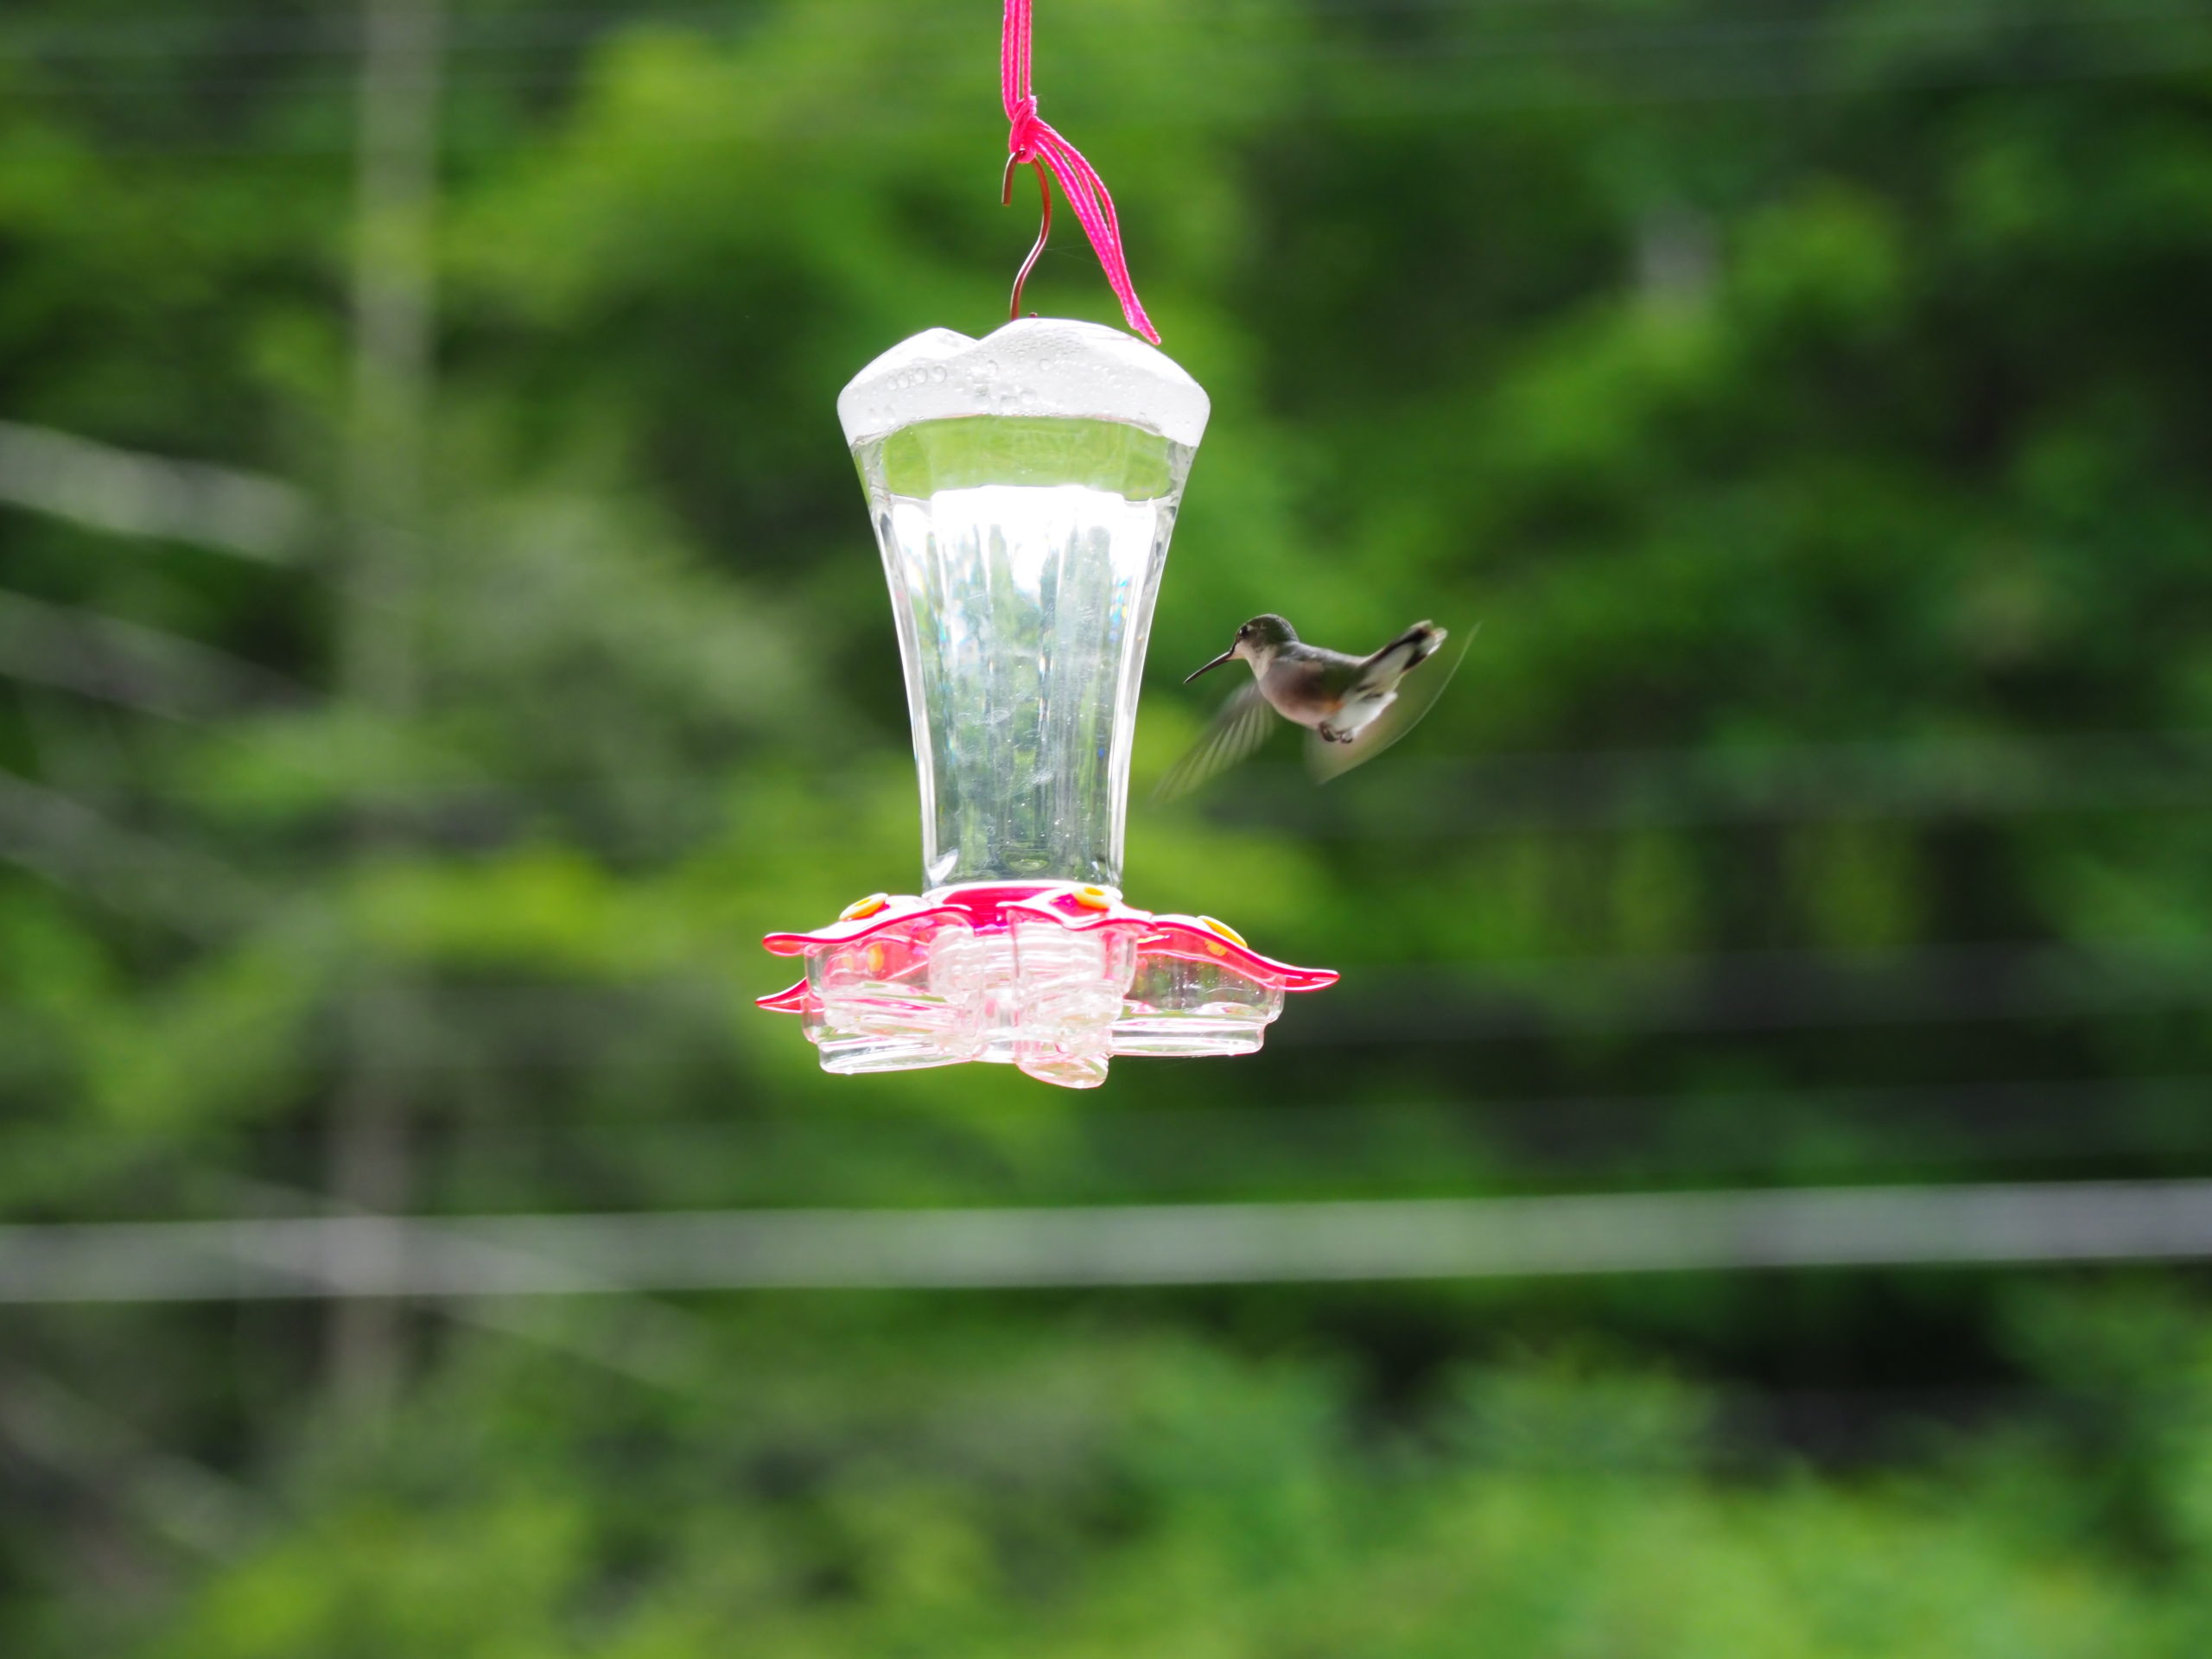 A ruby-throated hummingbird approaches a 